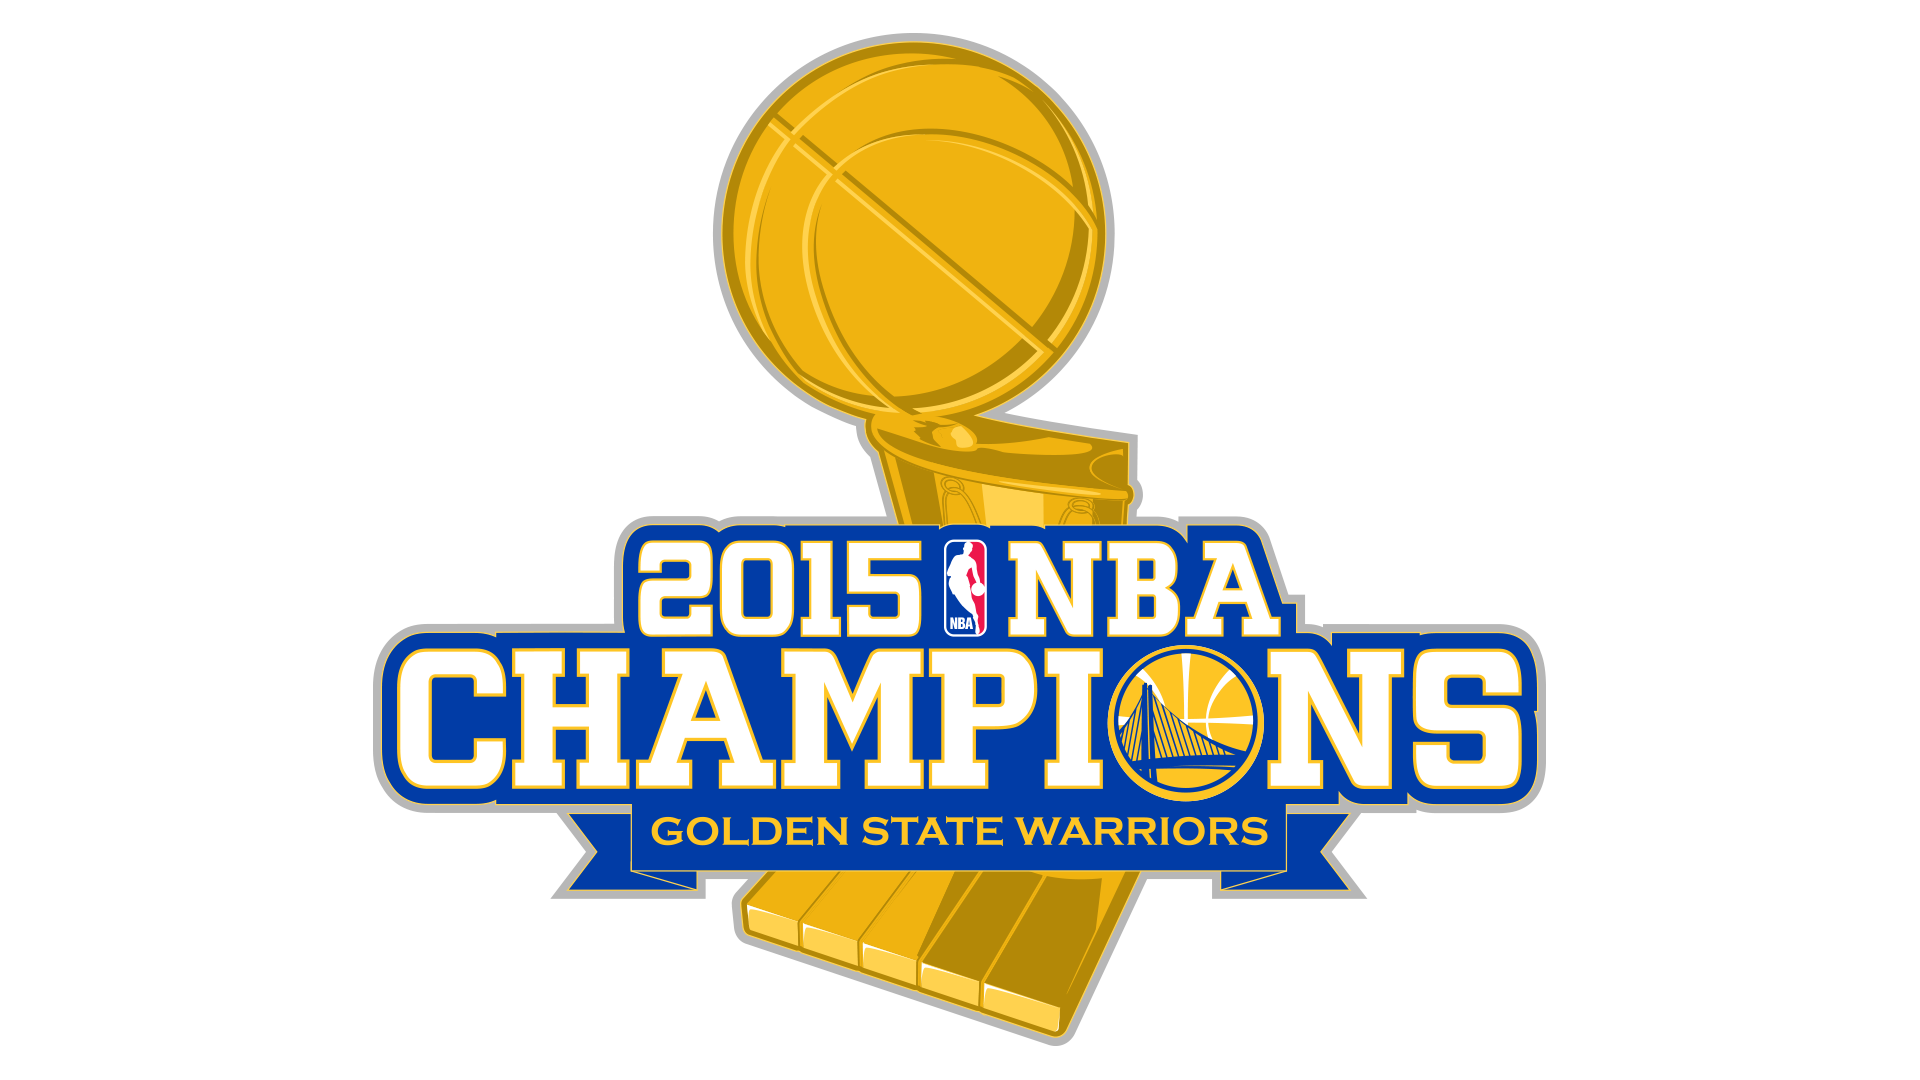 Oakland, CA will be celebrating the 2015 NBA Champion Golden State Warriors